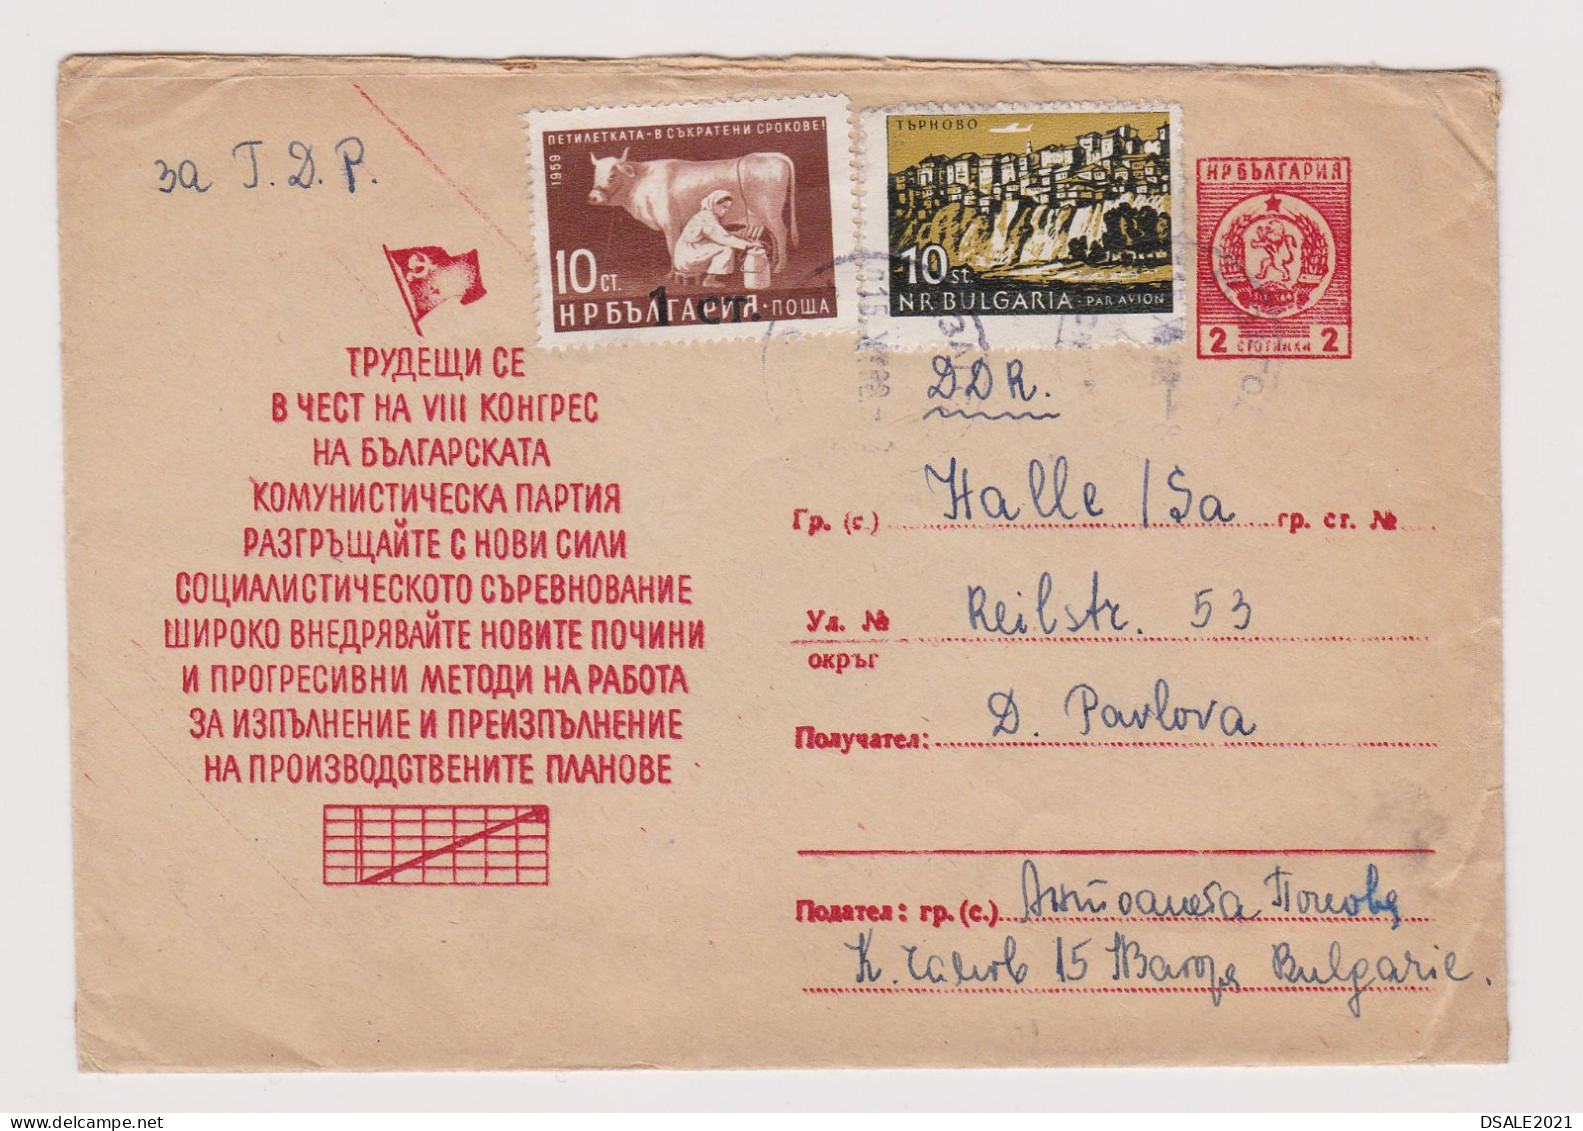 Bulgaria Bulgarie Bulgarien 1962 Ganzsachen, Entier, Stationery Cover, Communist Slogan, Topic Stamps To DDR (66241) - Enveloppes